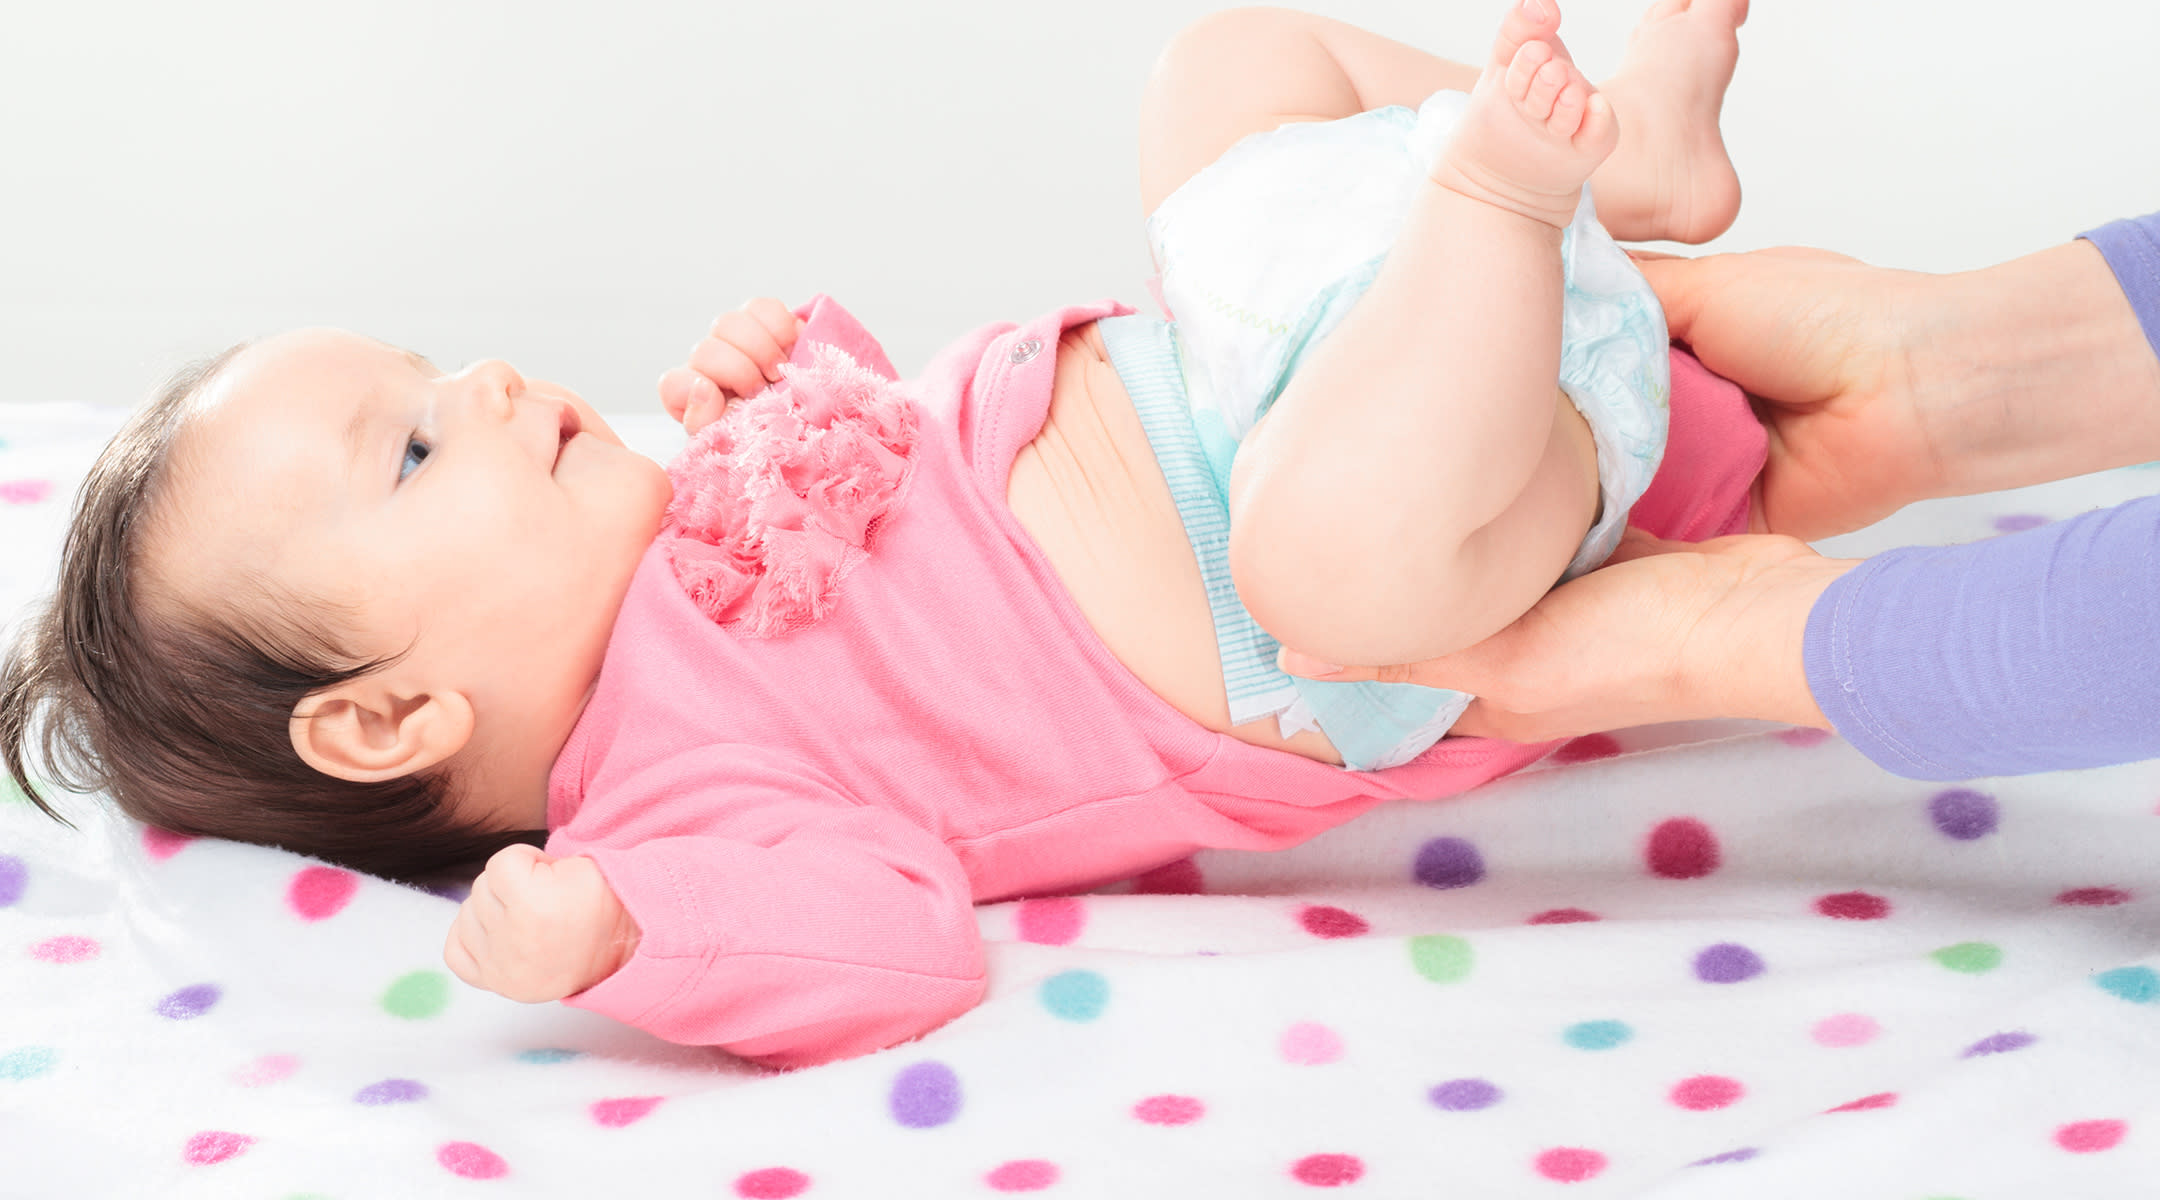 Q&A: How will I know if baby has diarrhea?